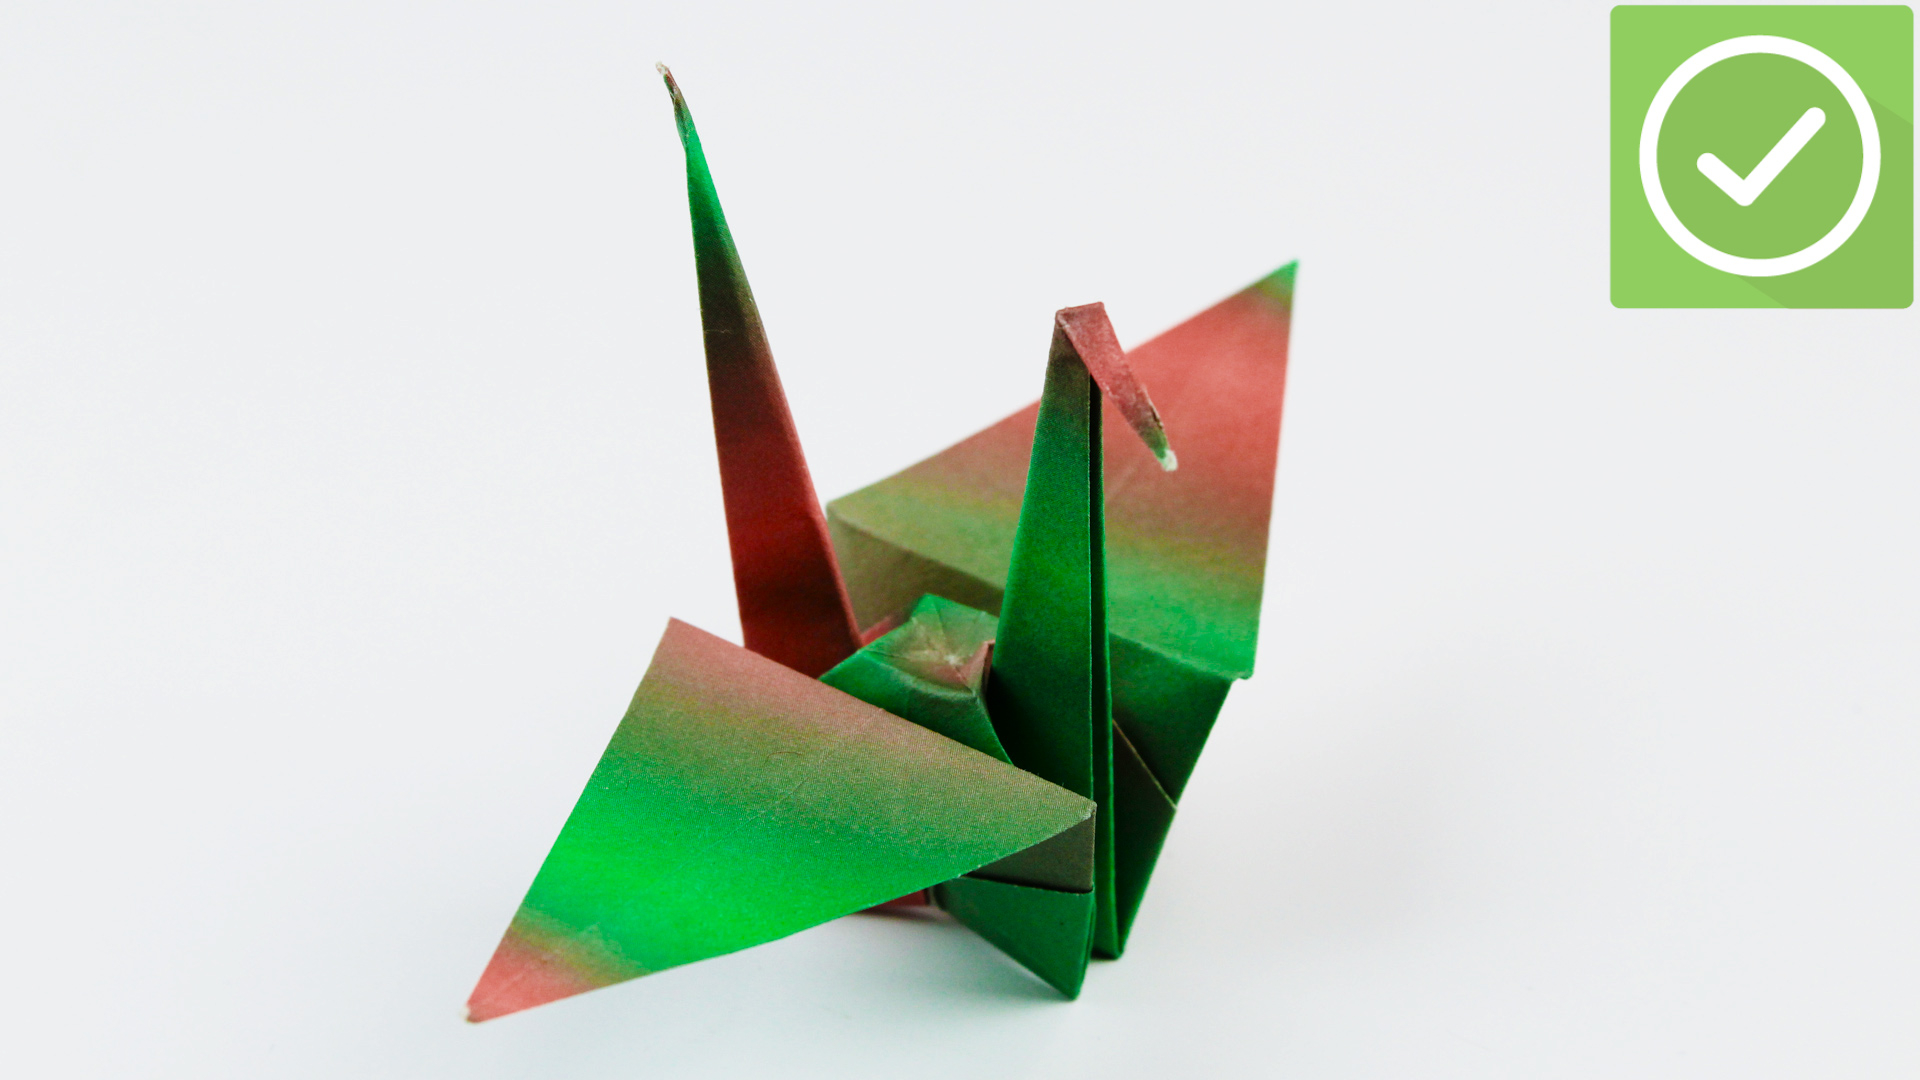 How To Make An Origami Flapping Bird Step By Step How To Fold A Paper Crane With Pictures Wikihow